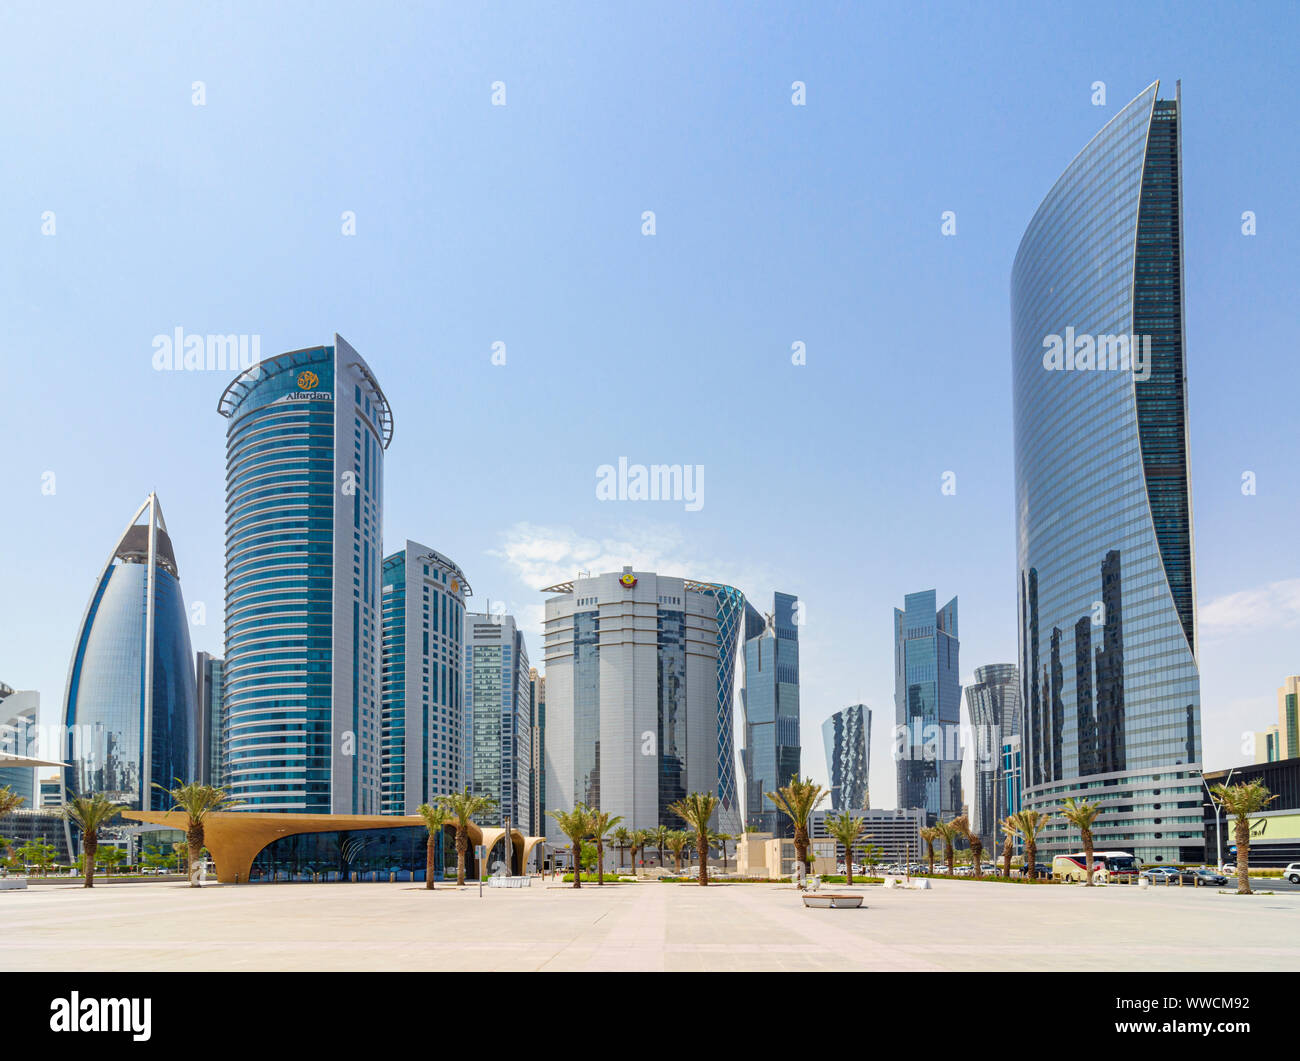 Views over the entrance to the Doha Metro looking towards the skyscrapers of the West Bay area, Doha, Qatar Stock Photo